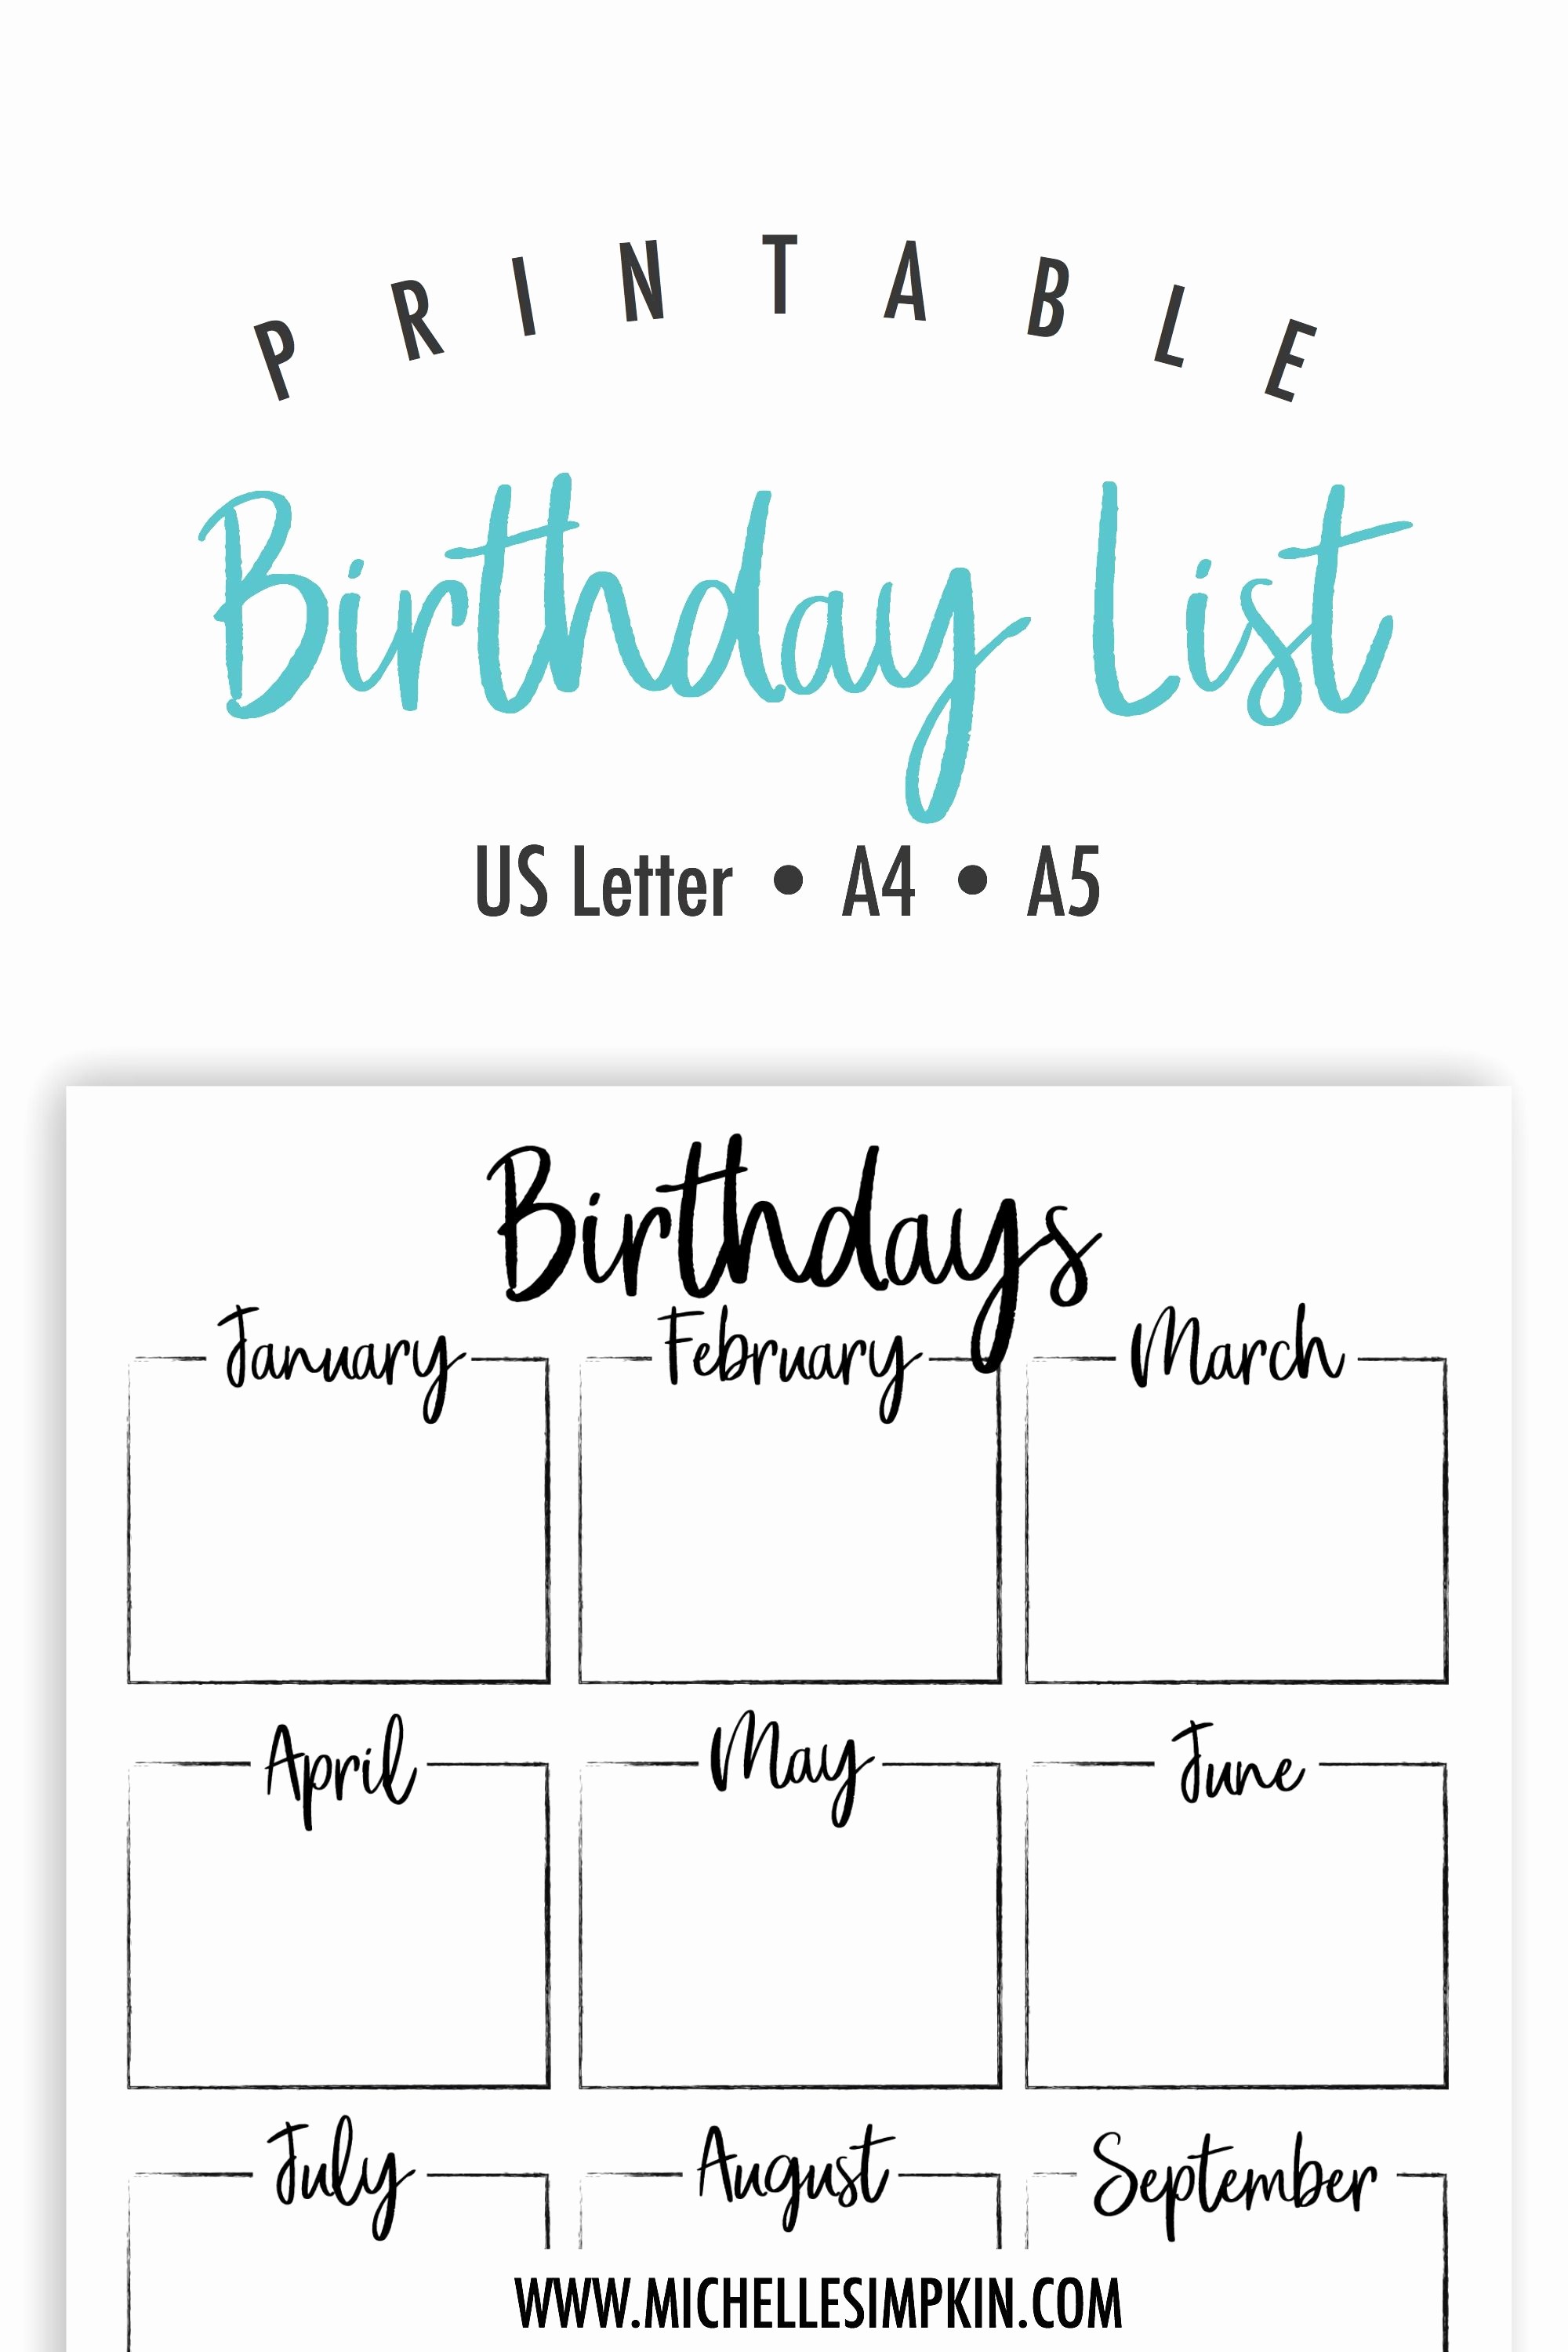 Birthday and Anniversary Calendar Template Inspirational Free Printable Keep Track Of All Your Friends and Family